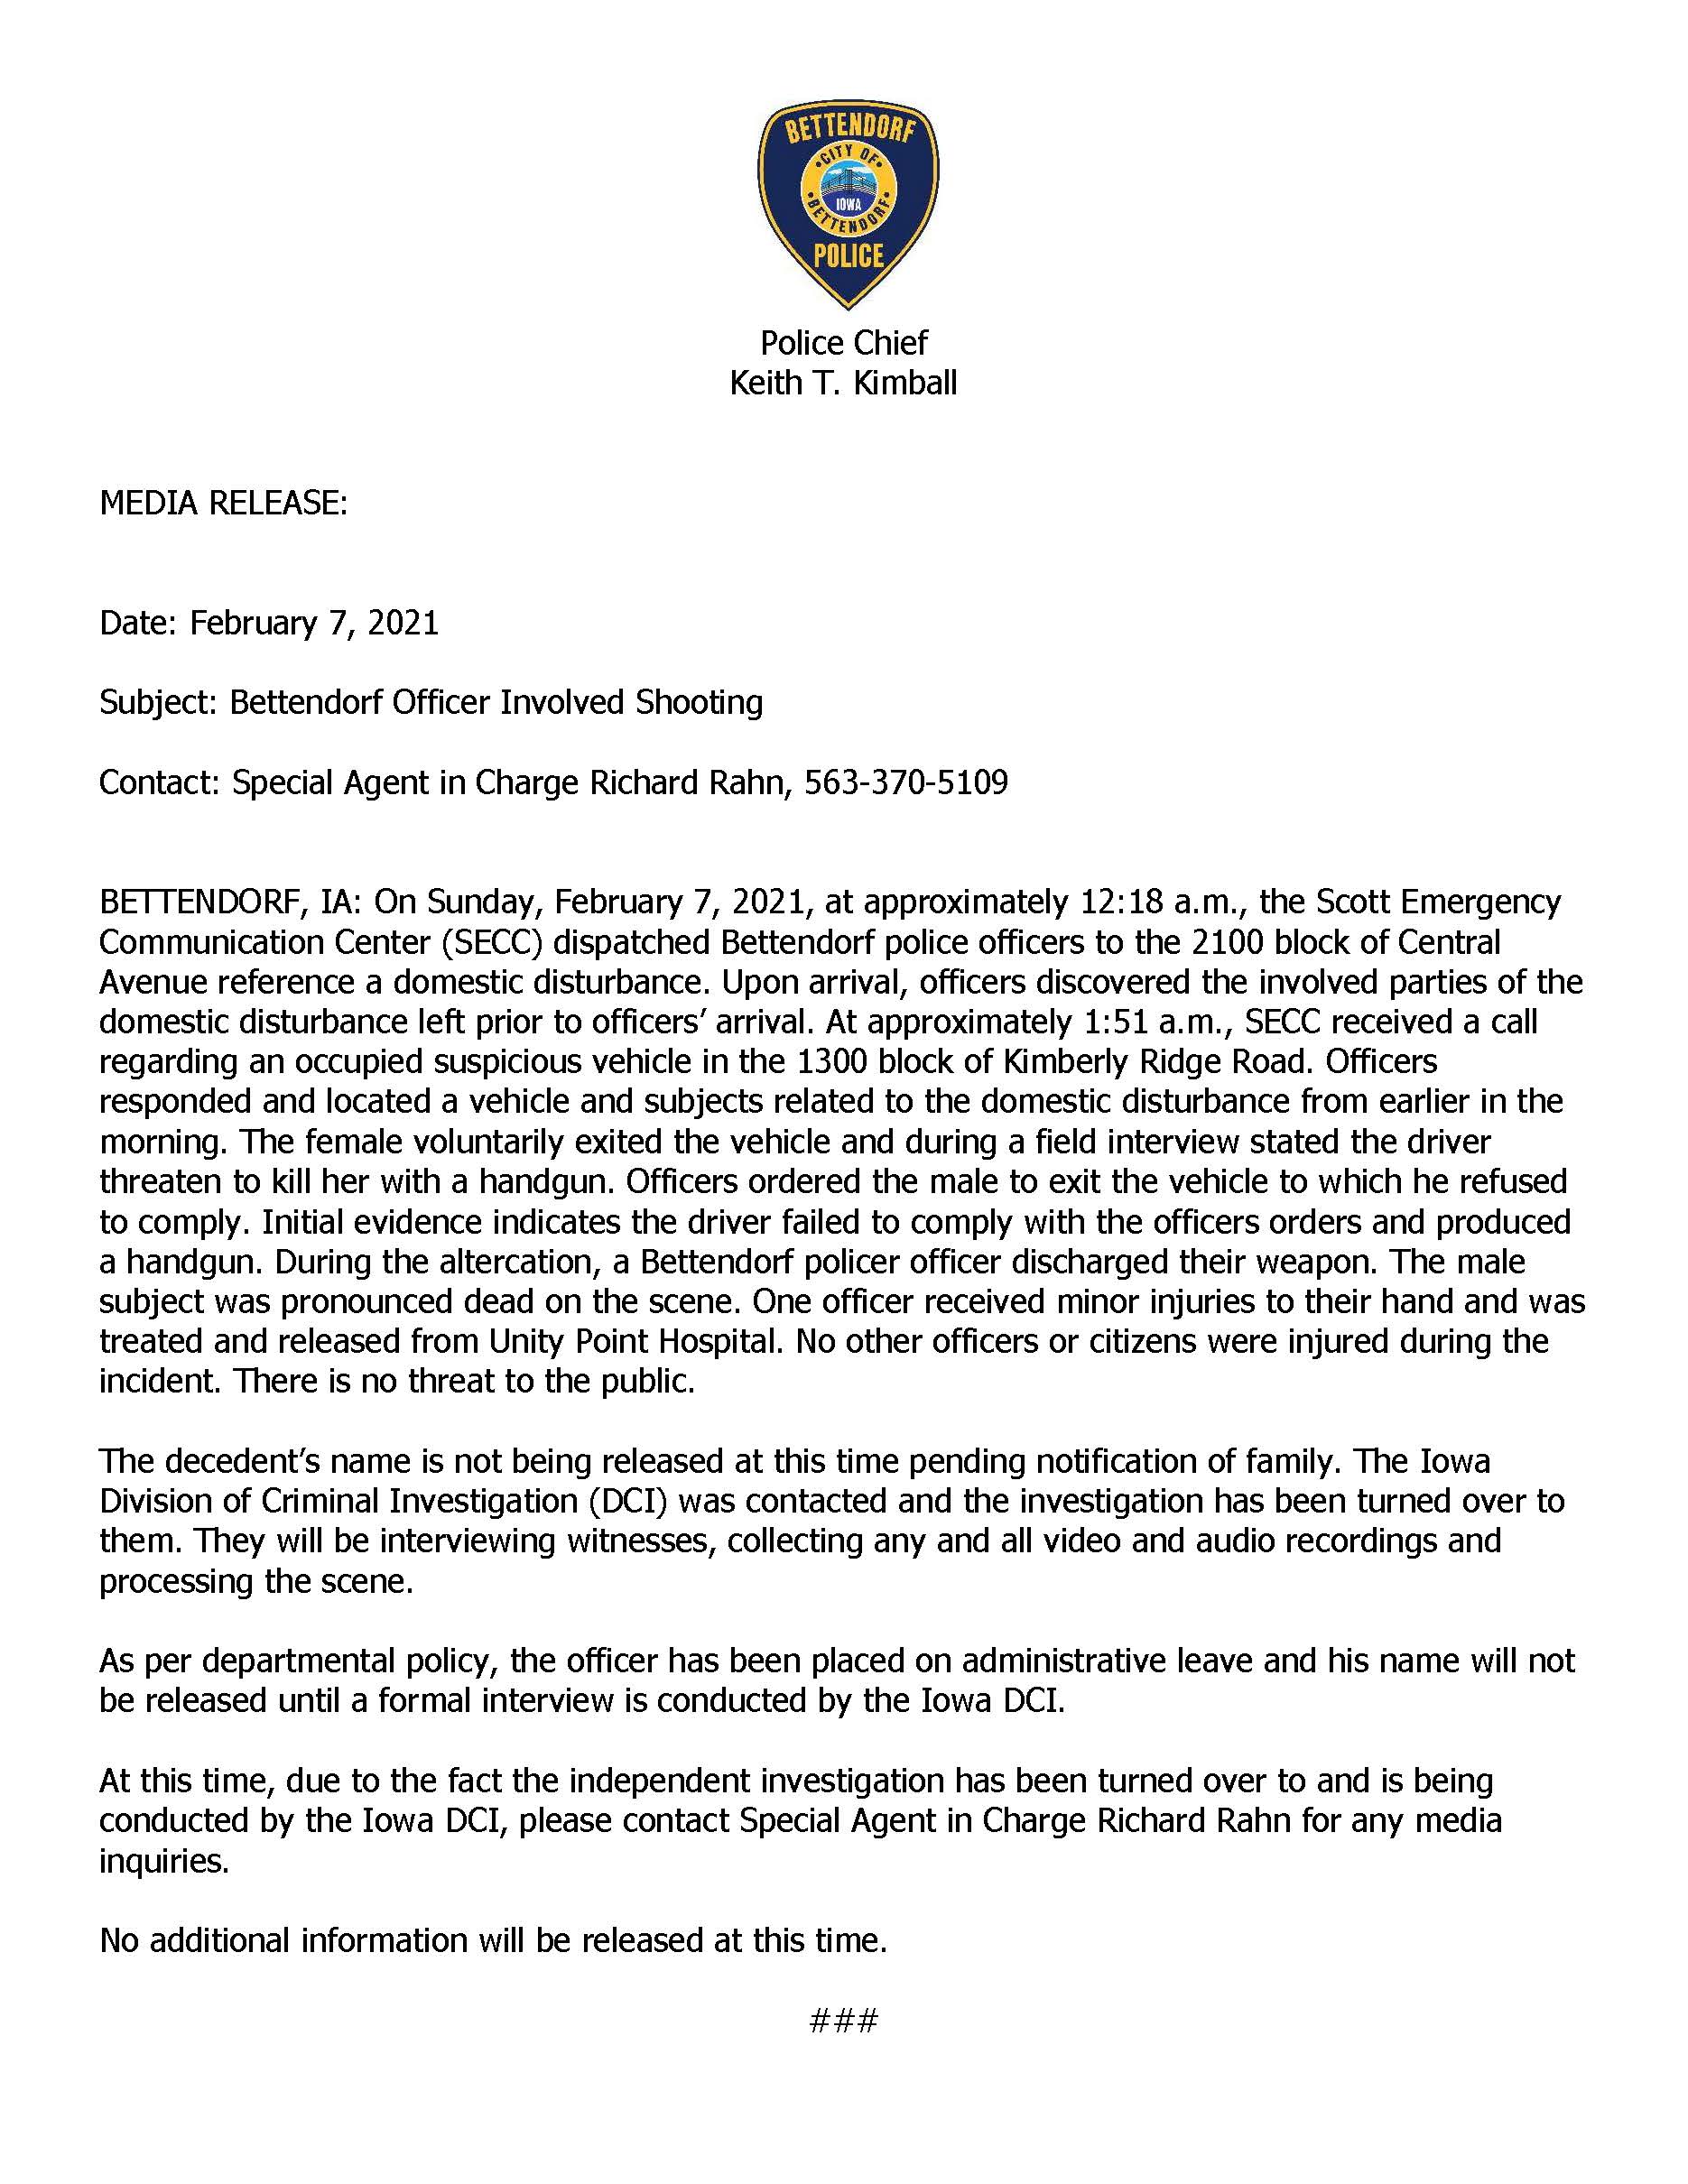 Link to Bettendorf Police Department Press Release